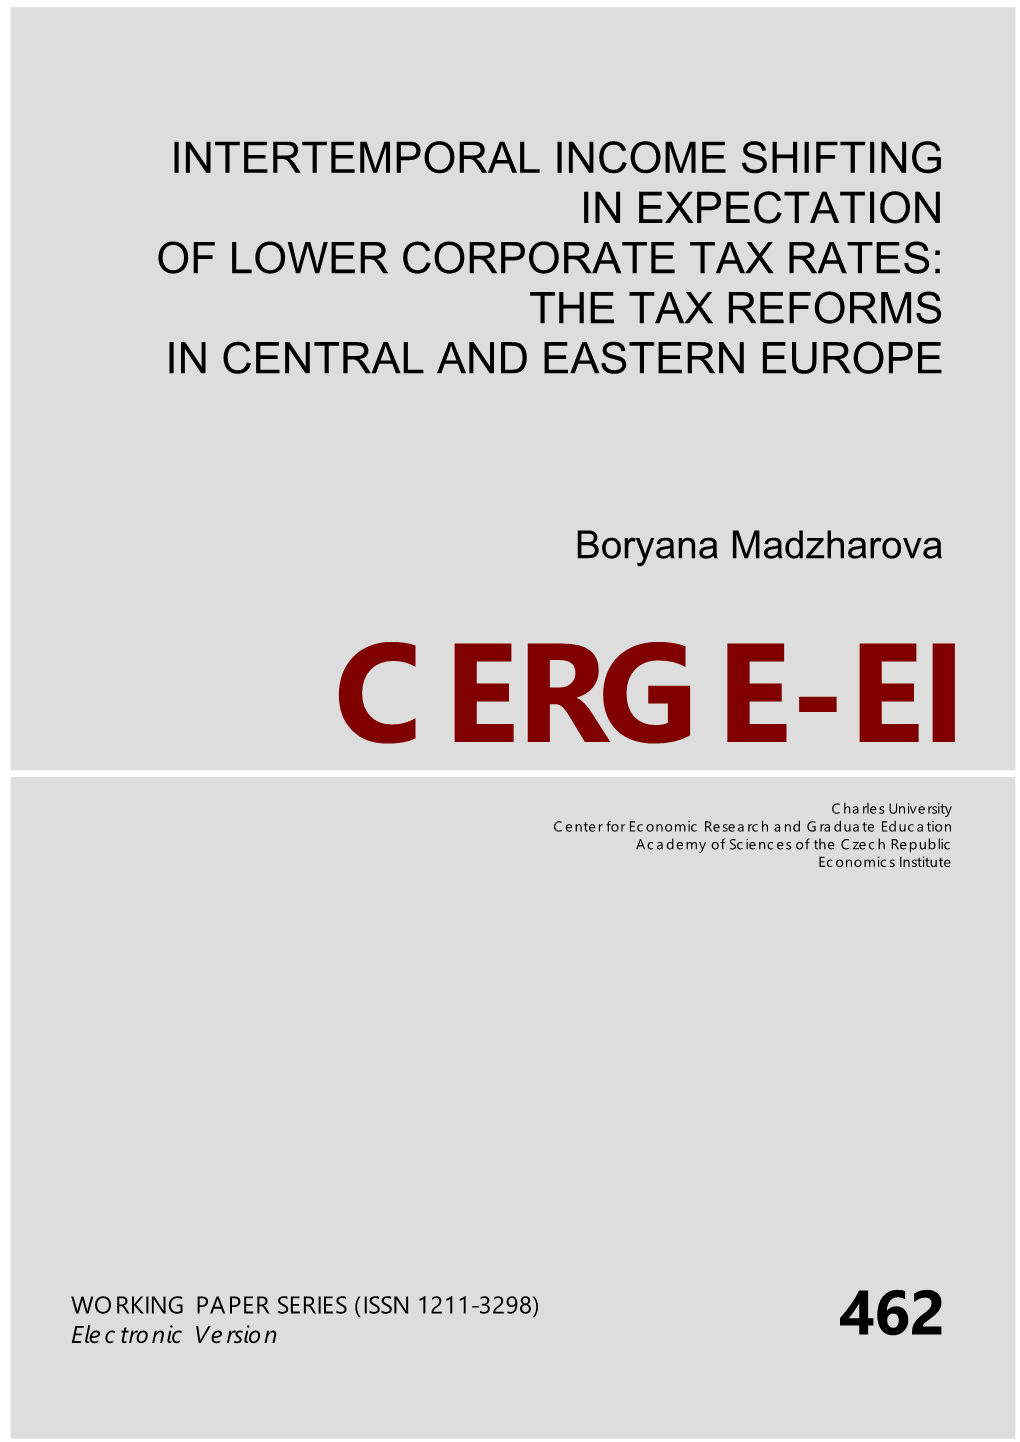 Intertemporal Income Shifting in Expectation of Lower Corporate Tax Rates: the Tax Reforms in Central and Eastern Europe